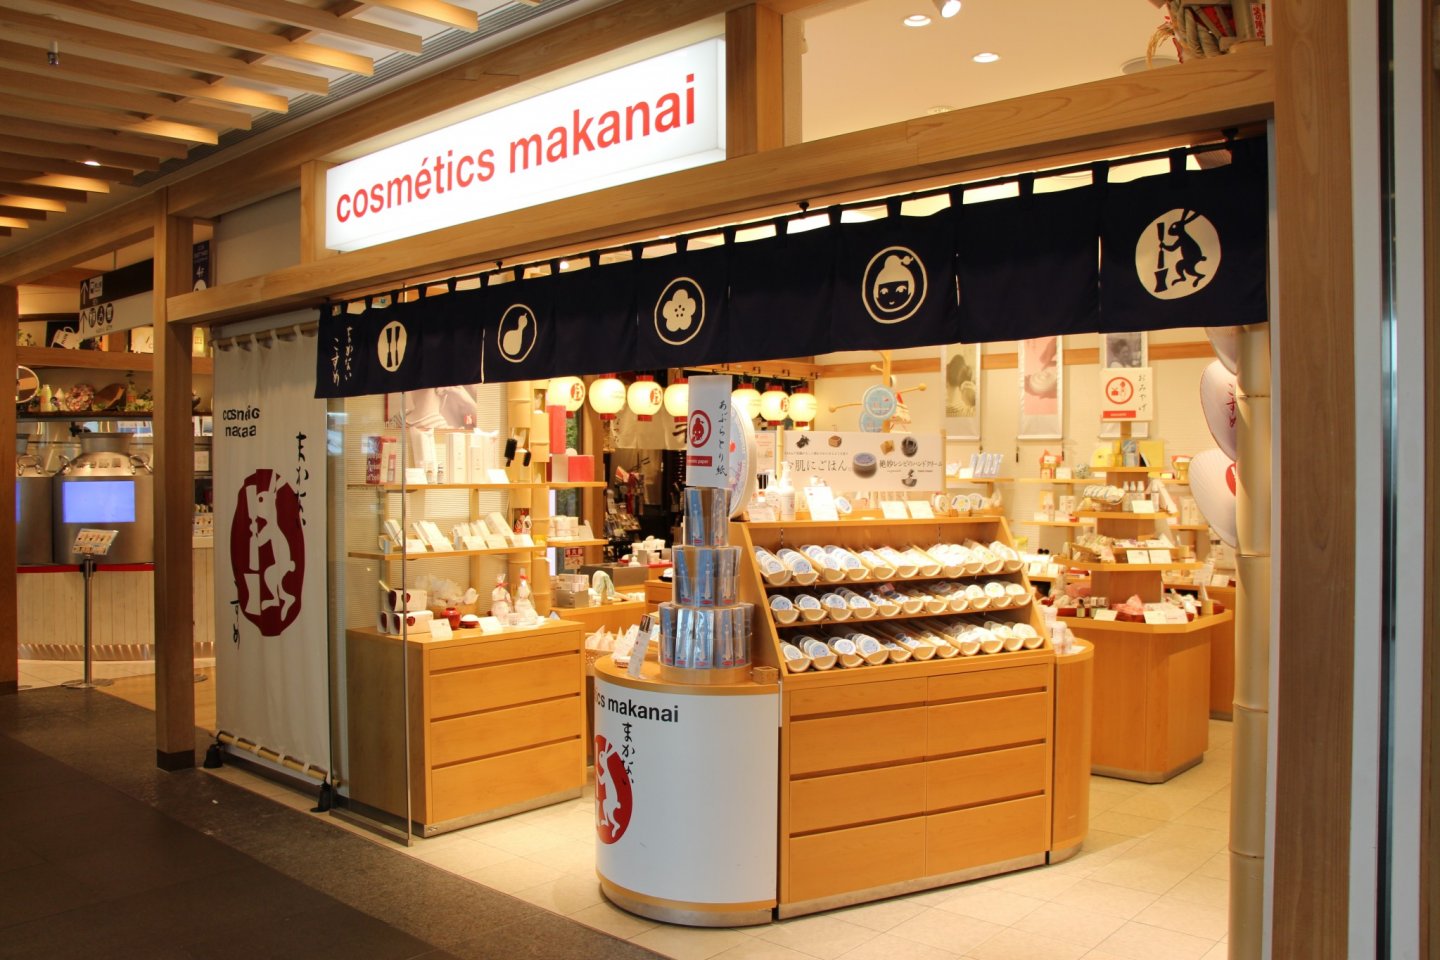 The Makanai store of Solamachi Skytree Town is located on the 4th floor